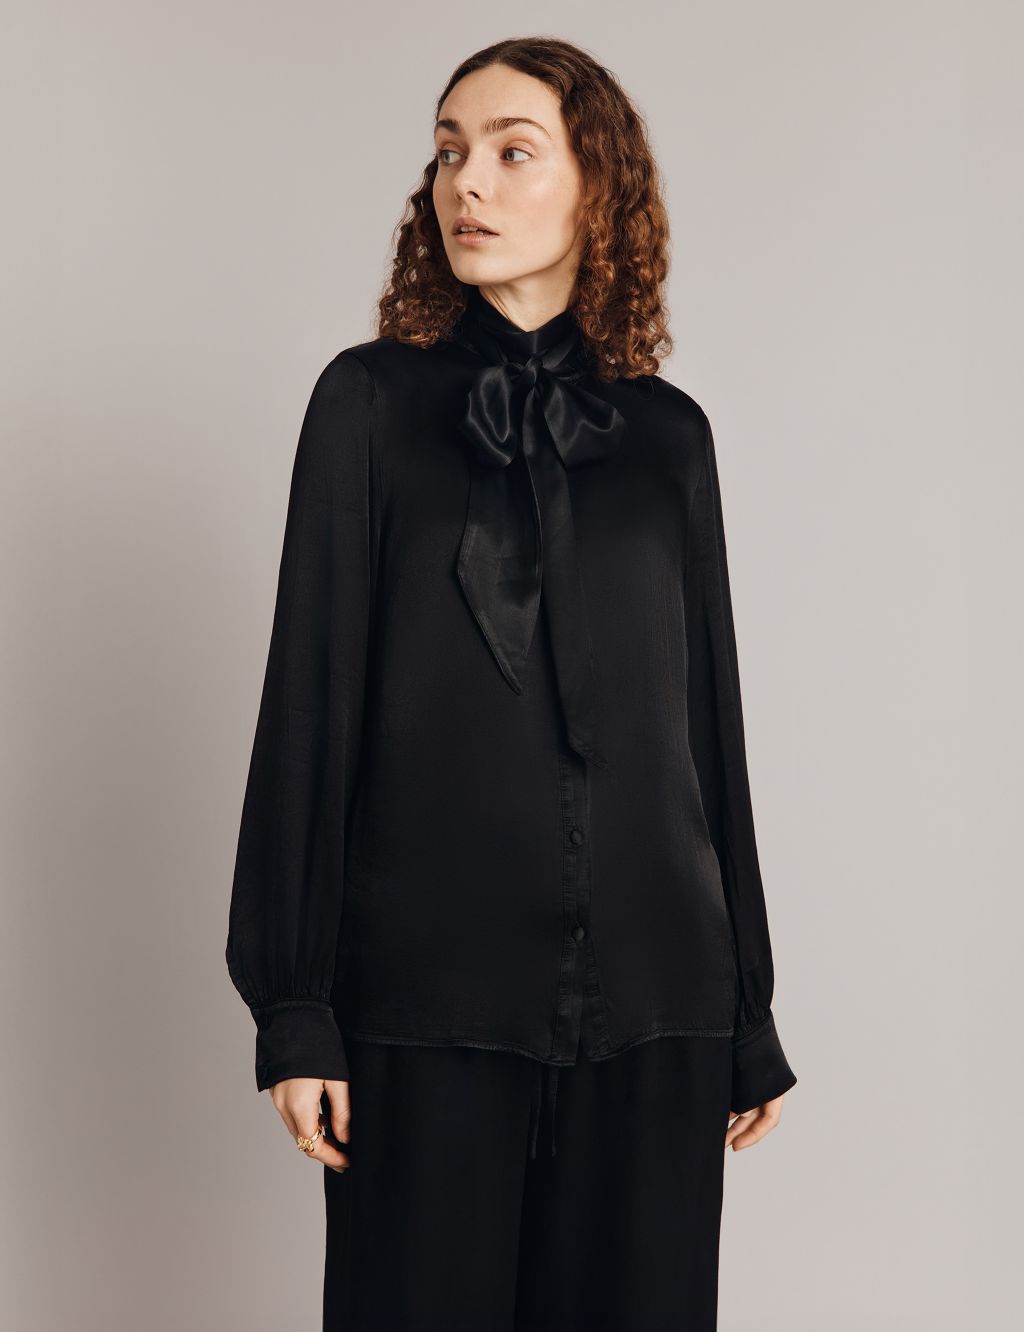 Tie Neck Blouse | Ghost | M&S